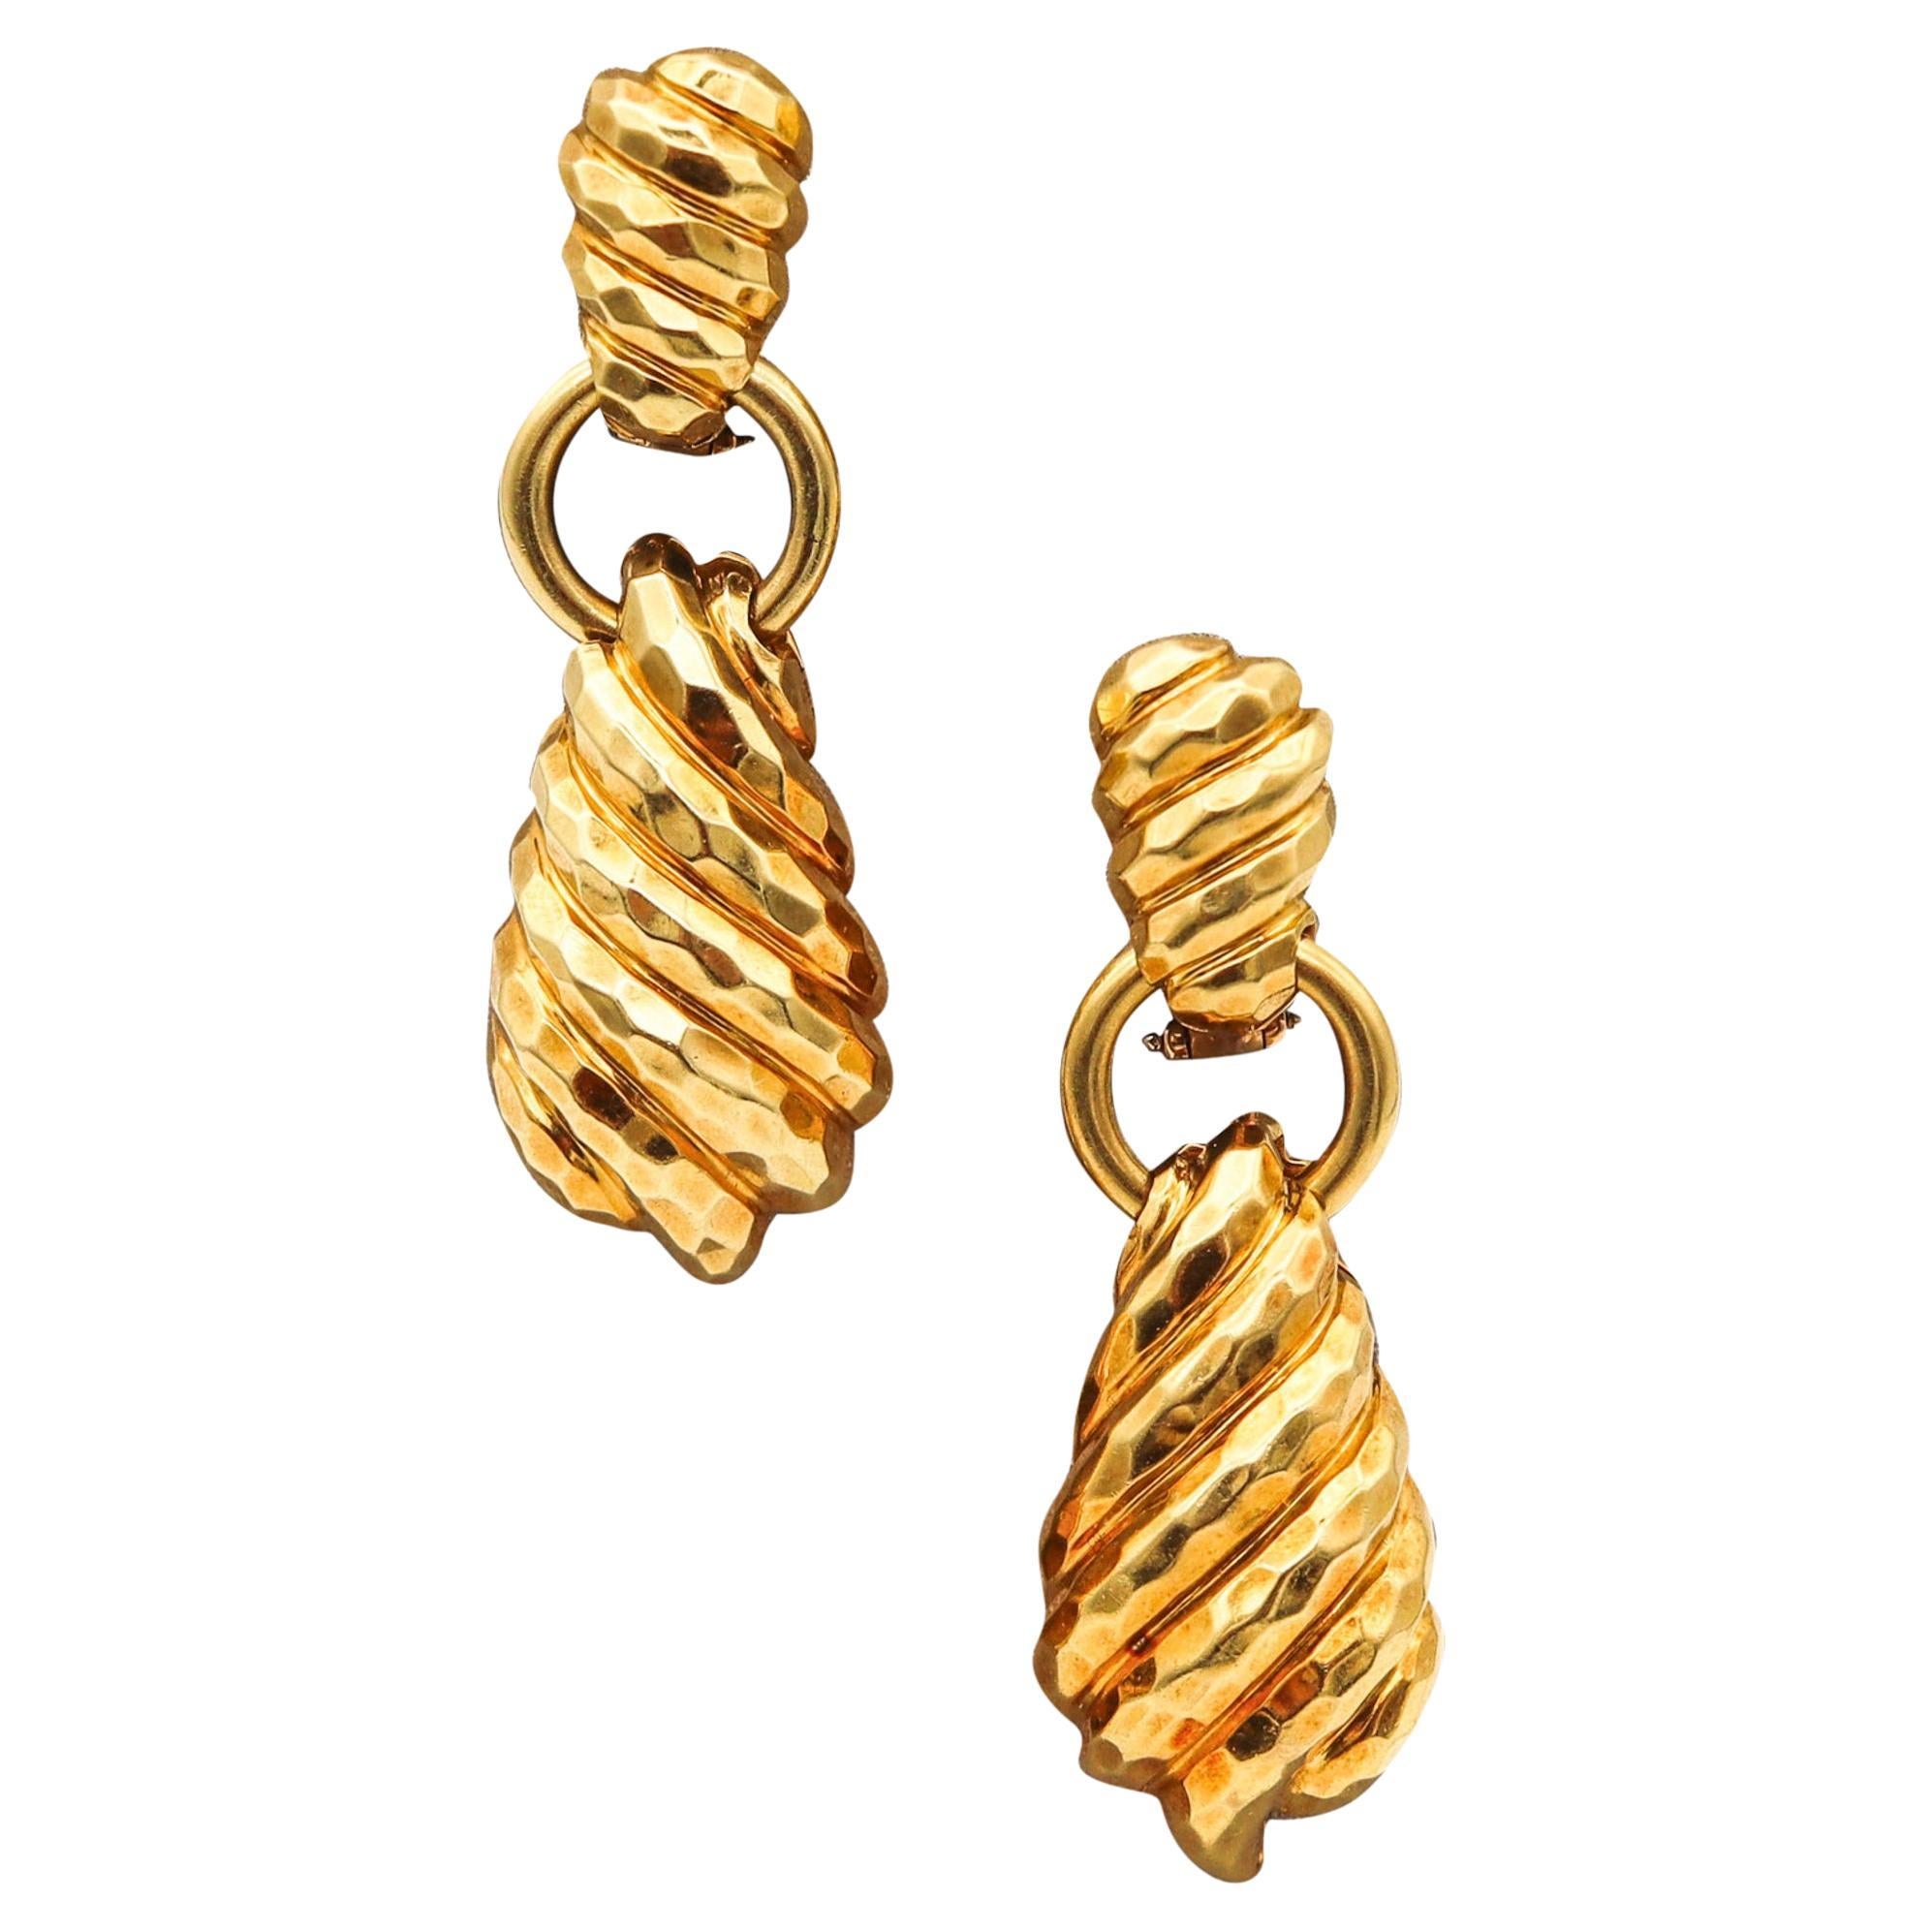 Henry Dunay New York Large Dangle Drop Earrings in Faceted Solid 18Kt Gold